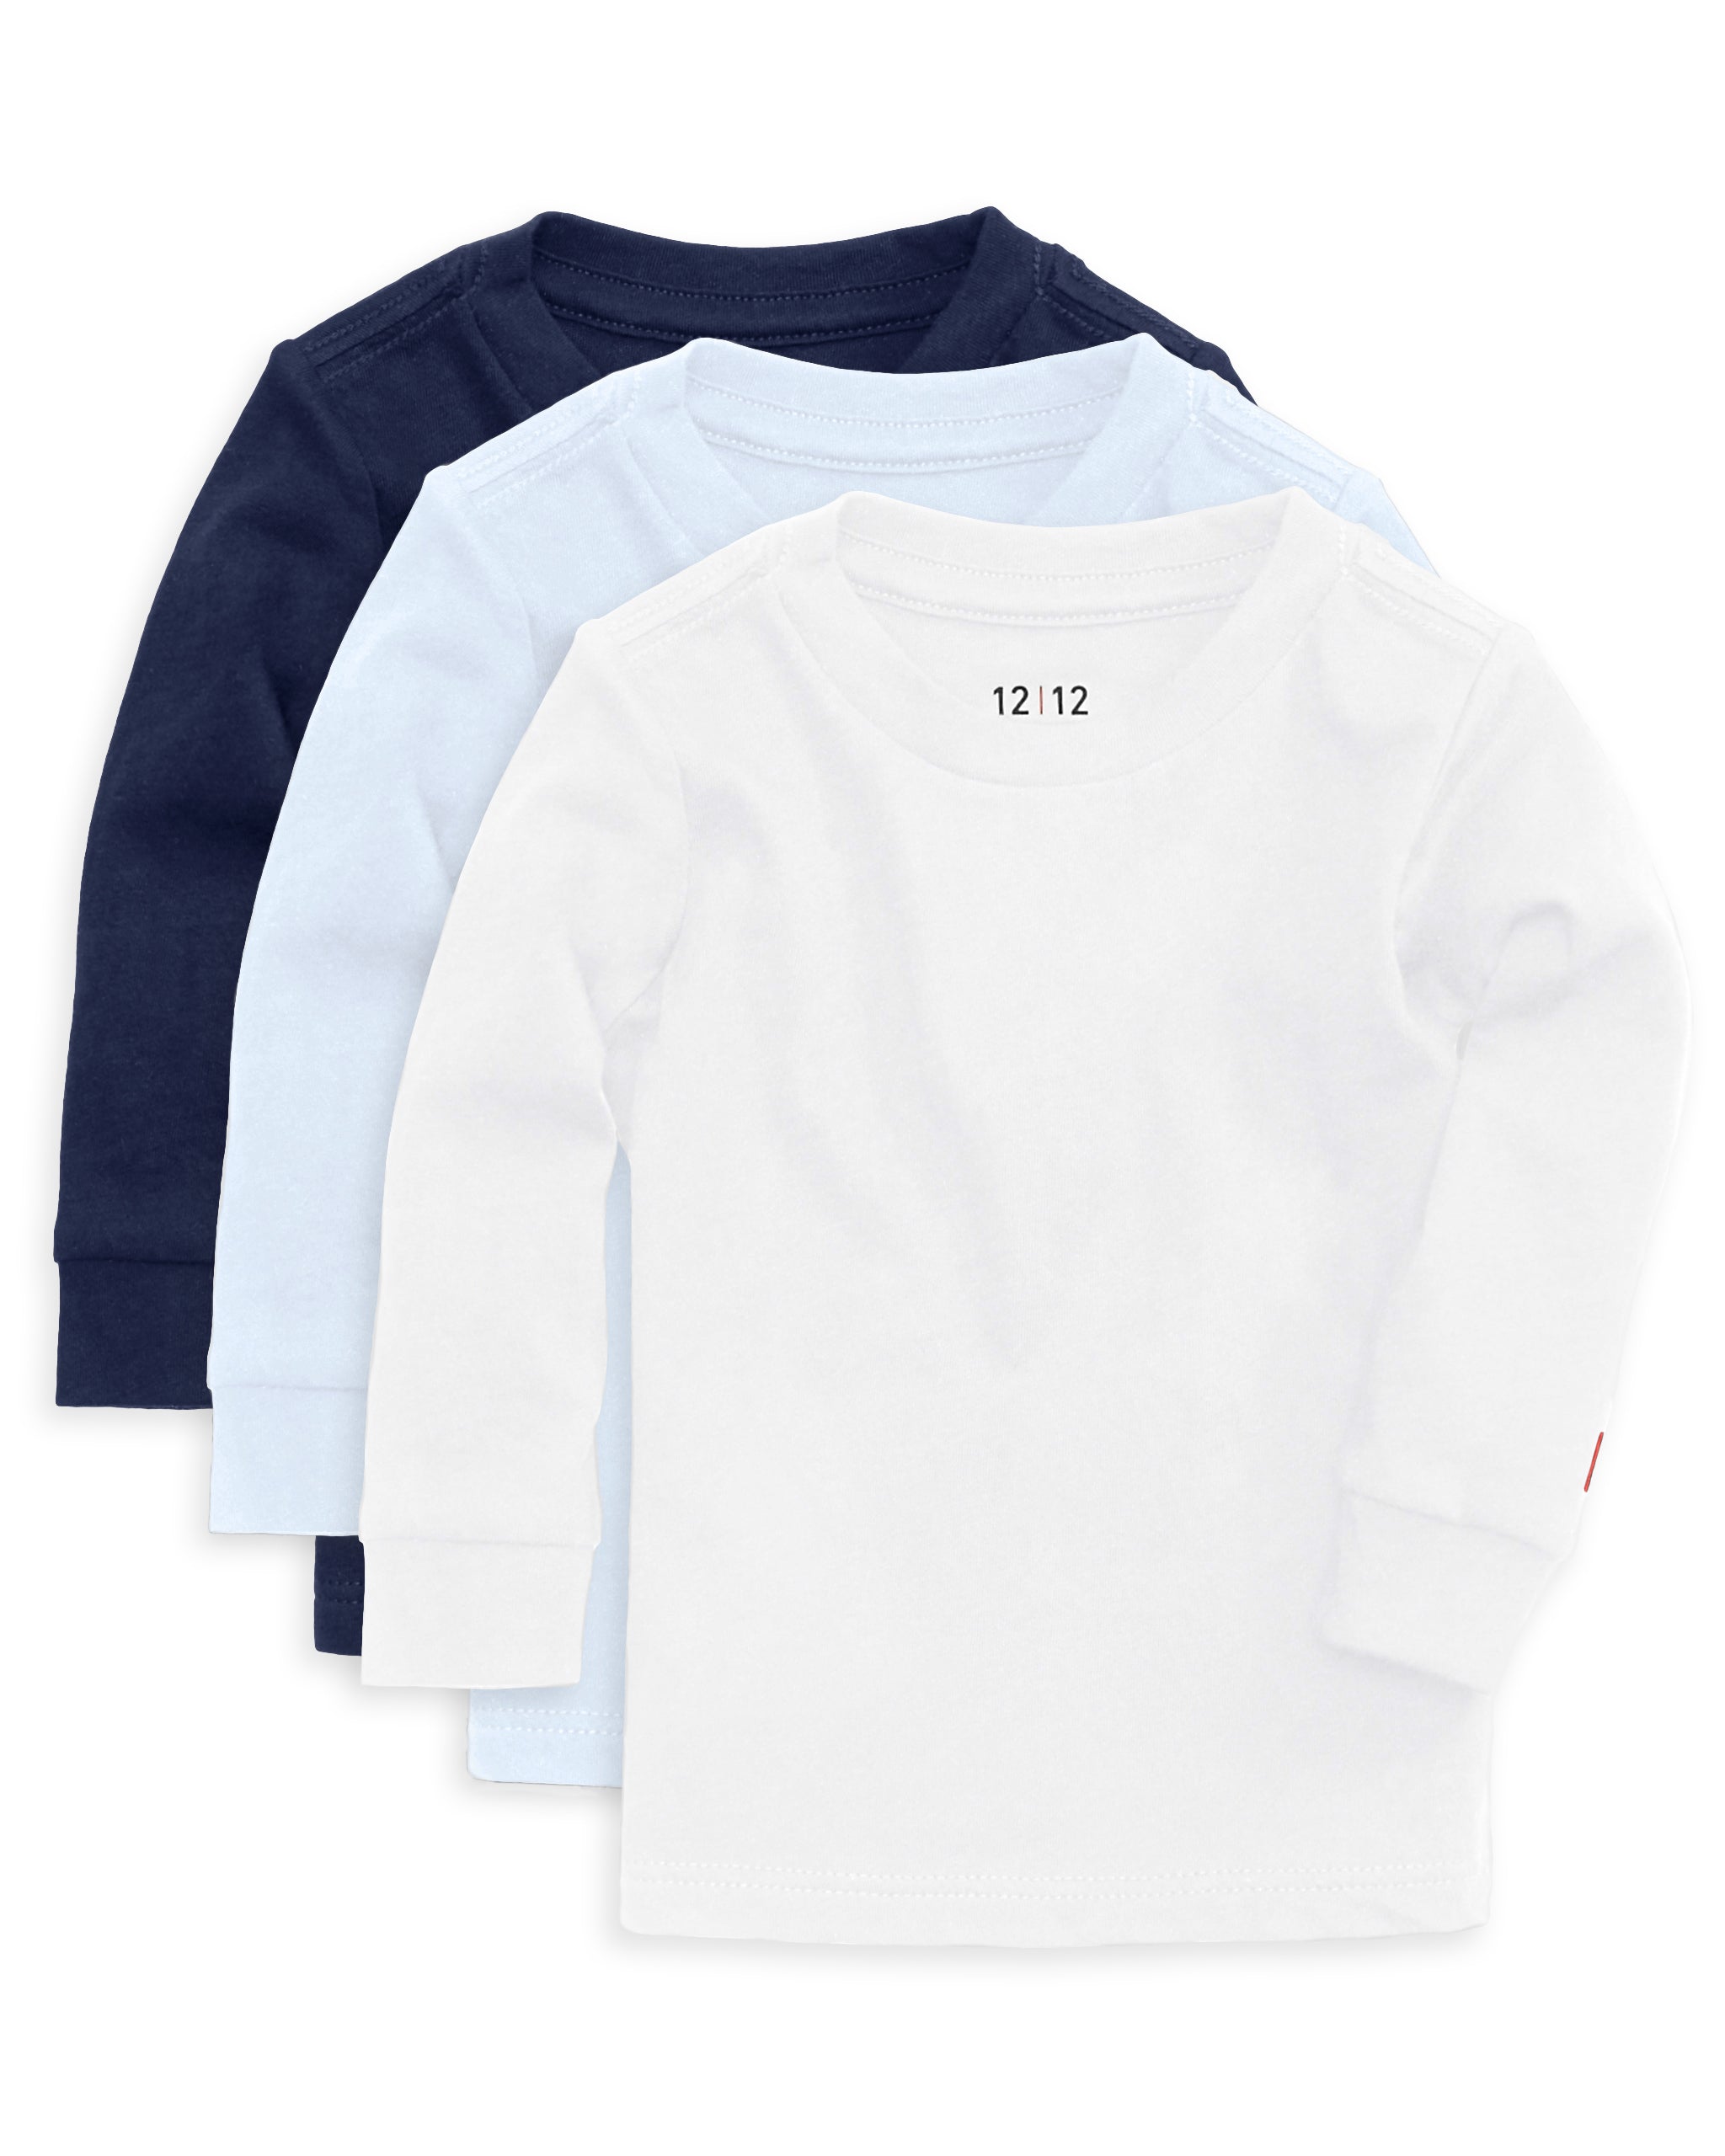 The Organic Long Sleeve Tee 3 Pack #color_White Light Blue Navy